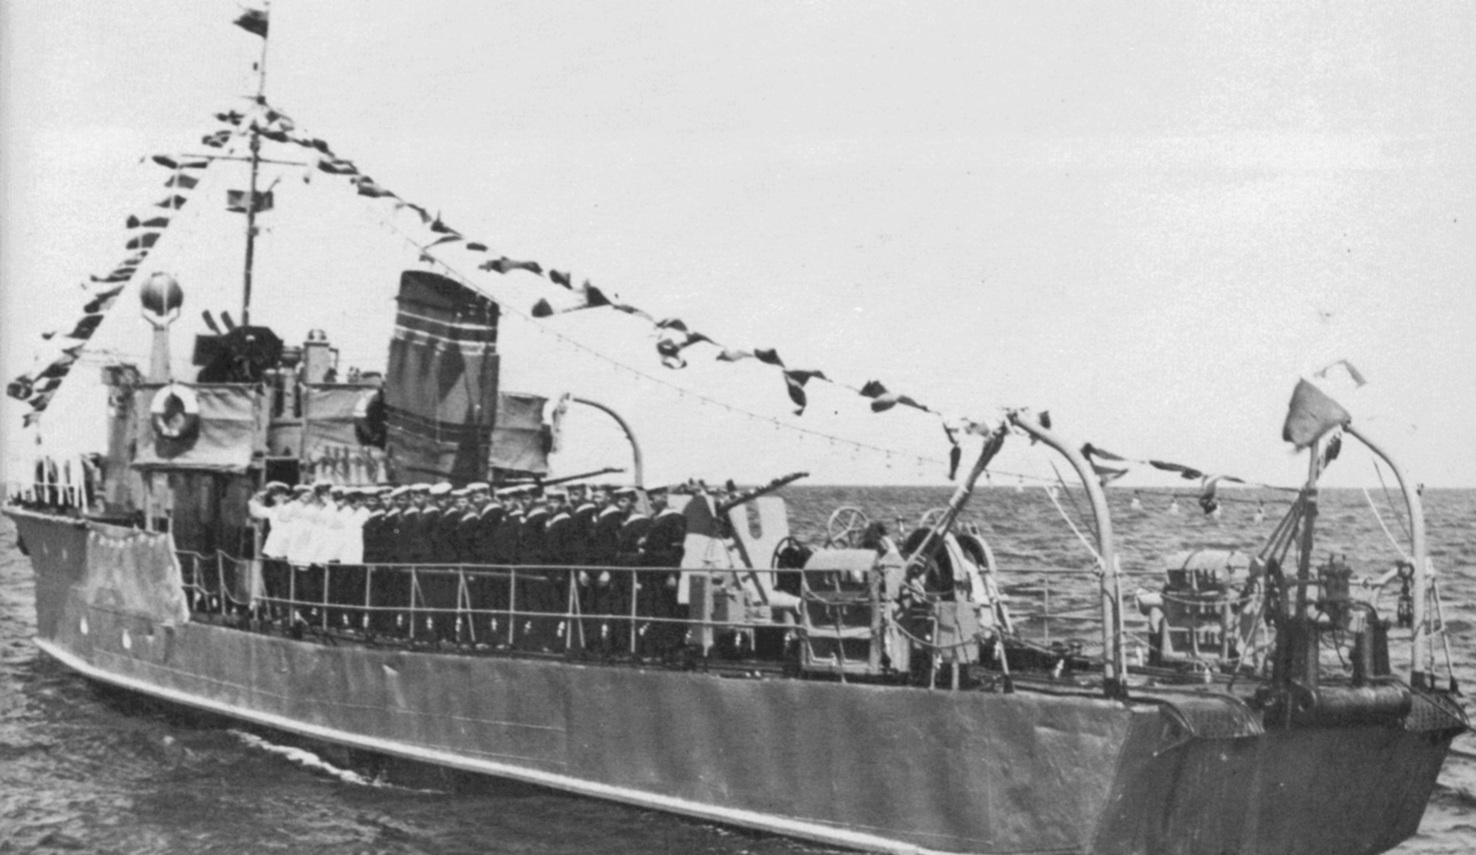 An unkown 253 at sea, manning the side